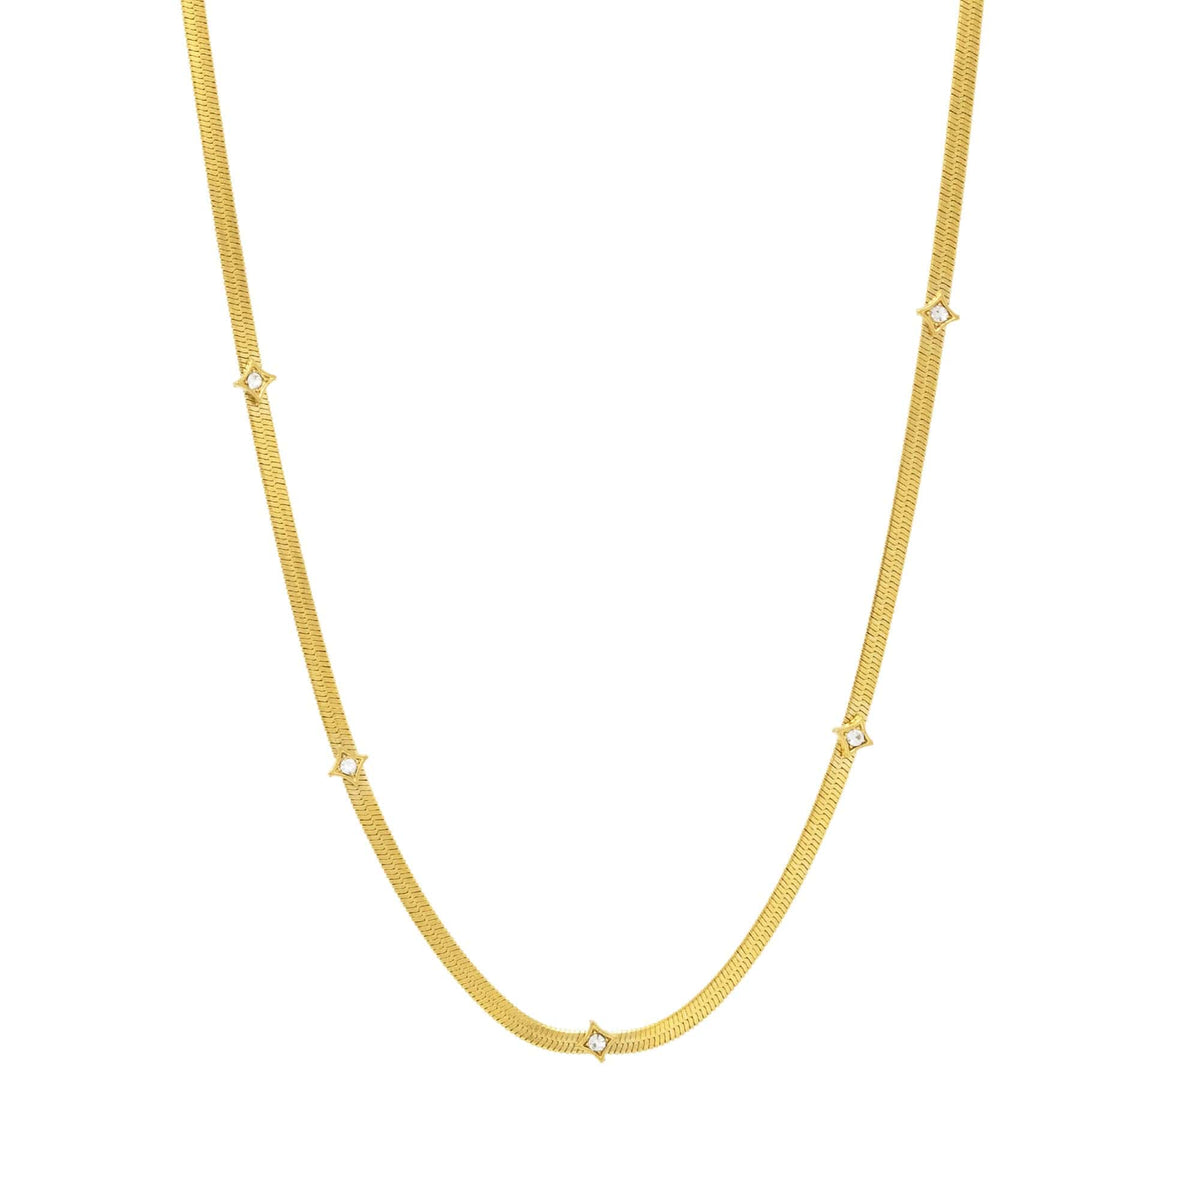 BohoMoon Stainless Steel Empower Necklace Gold